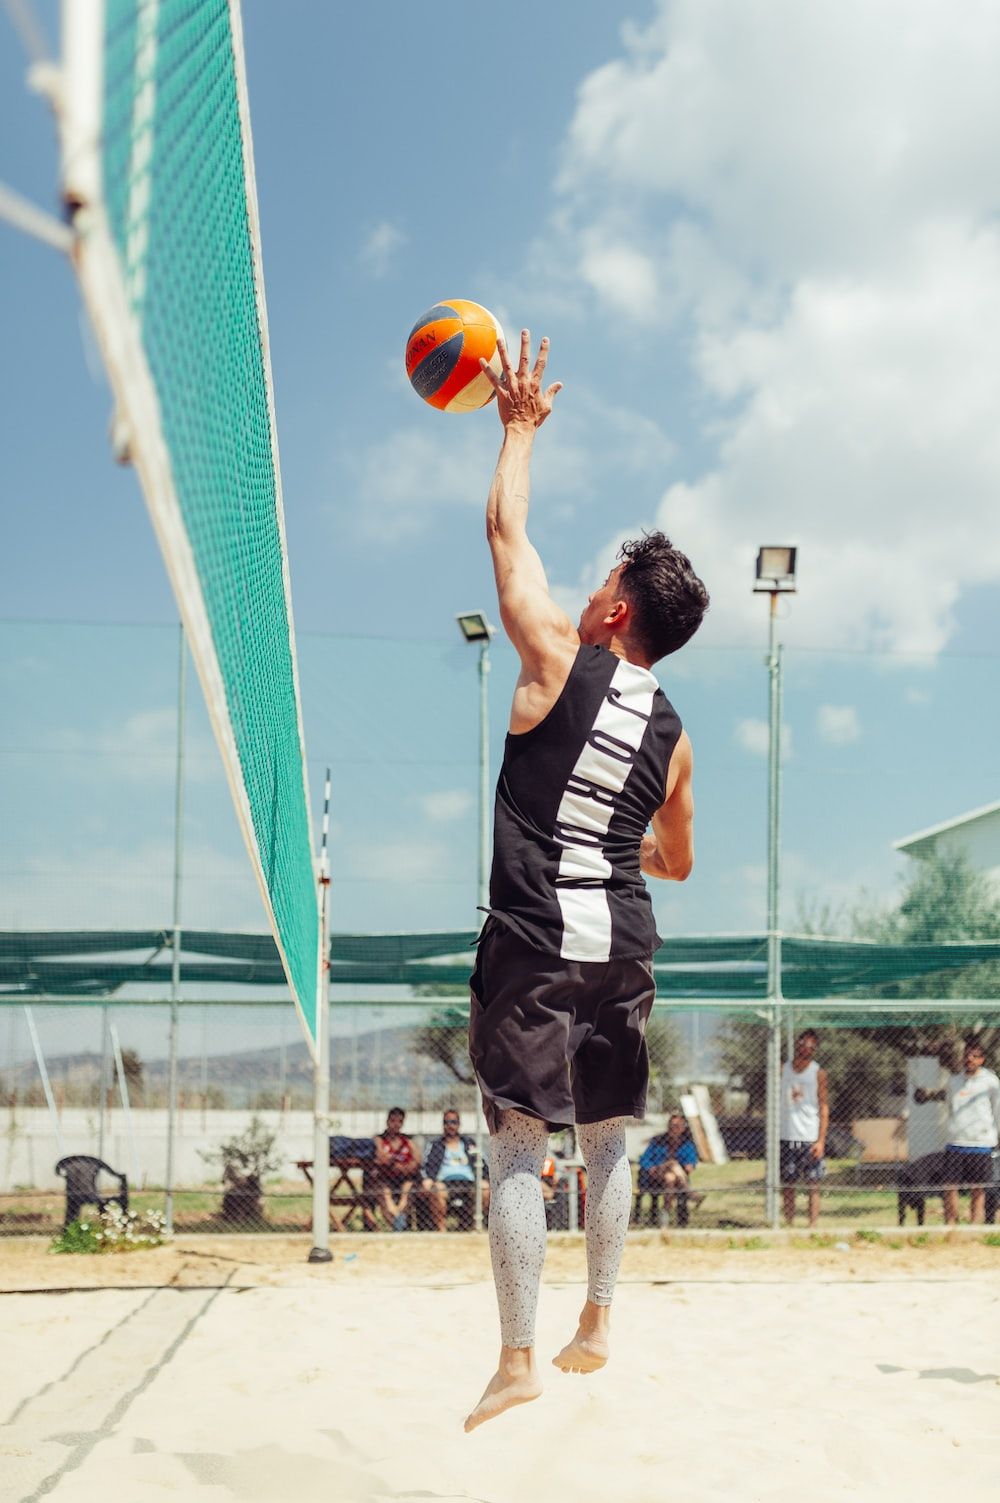 Volley Picture. Download Free Image